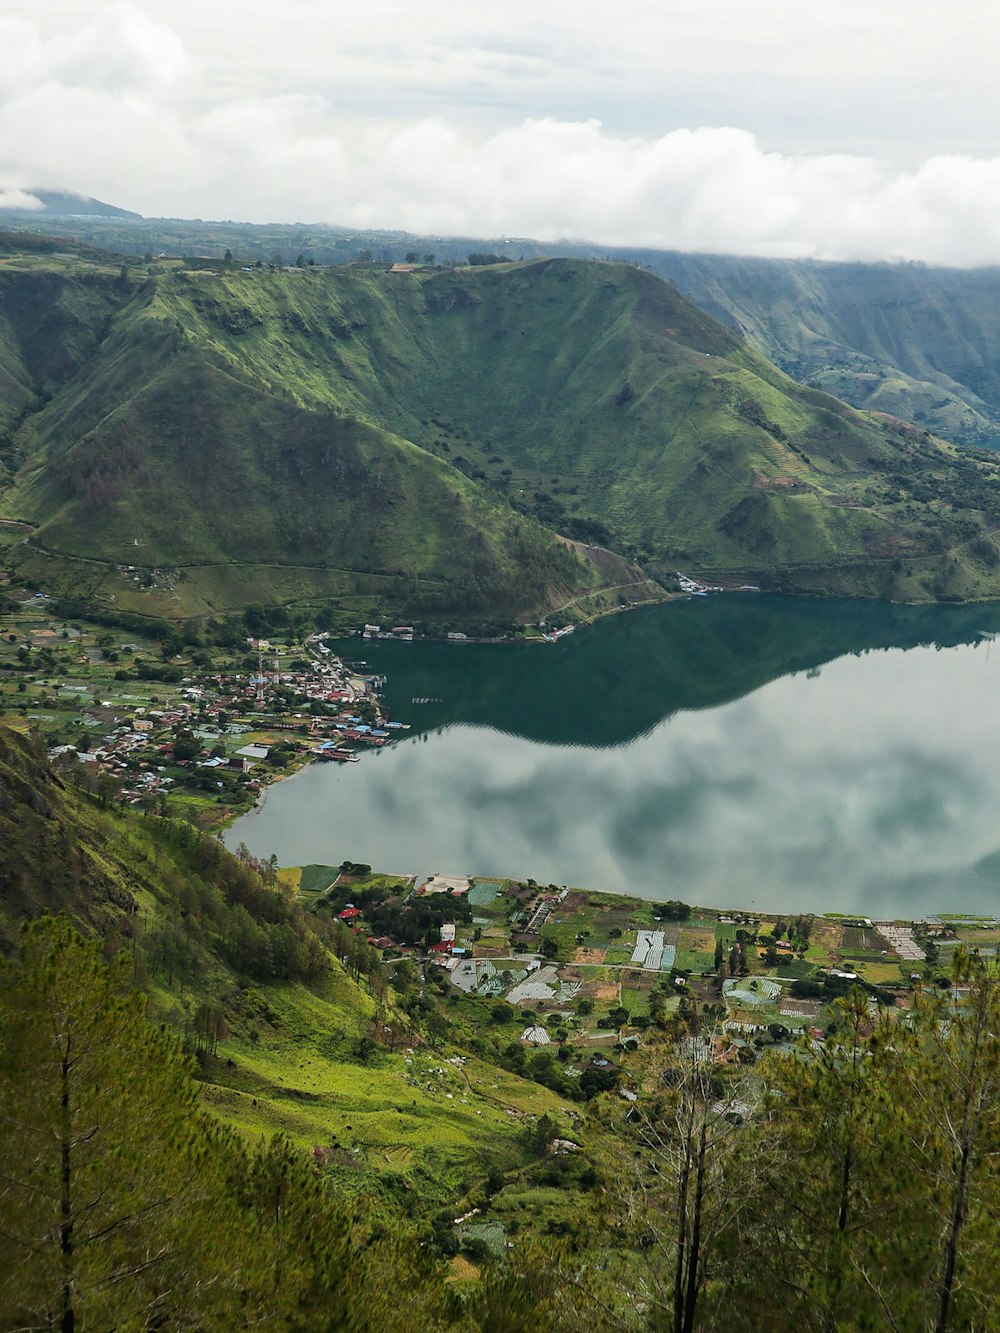 a large lake surrounded by lush green mountains